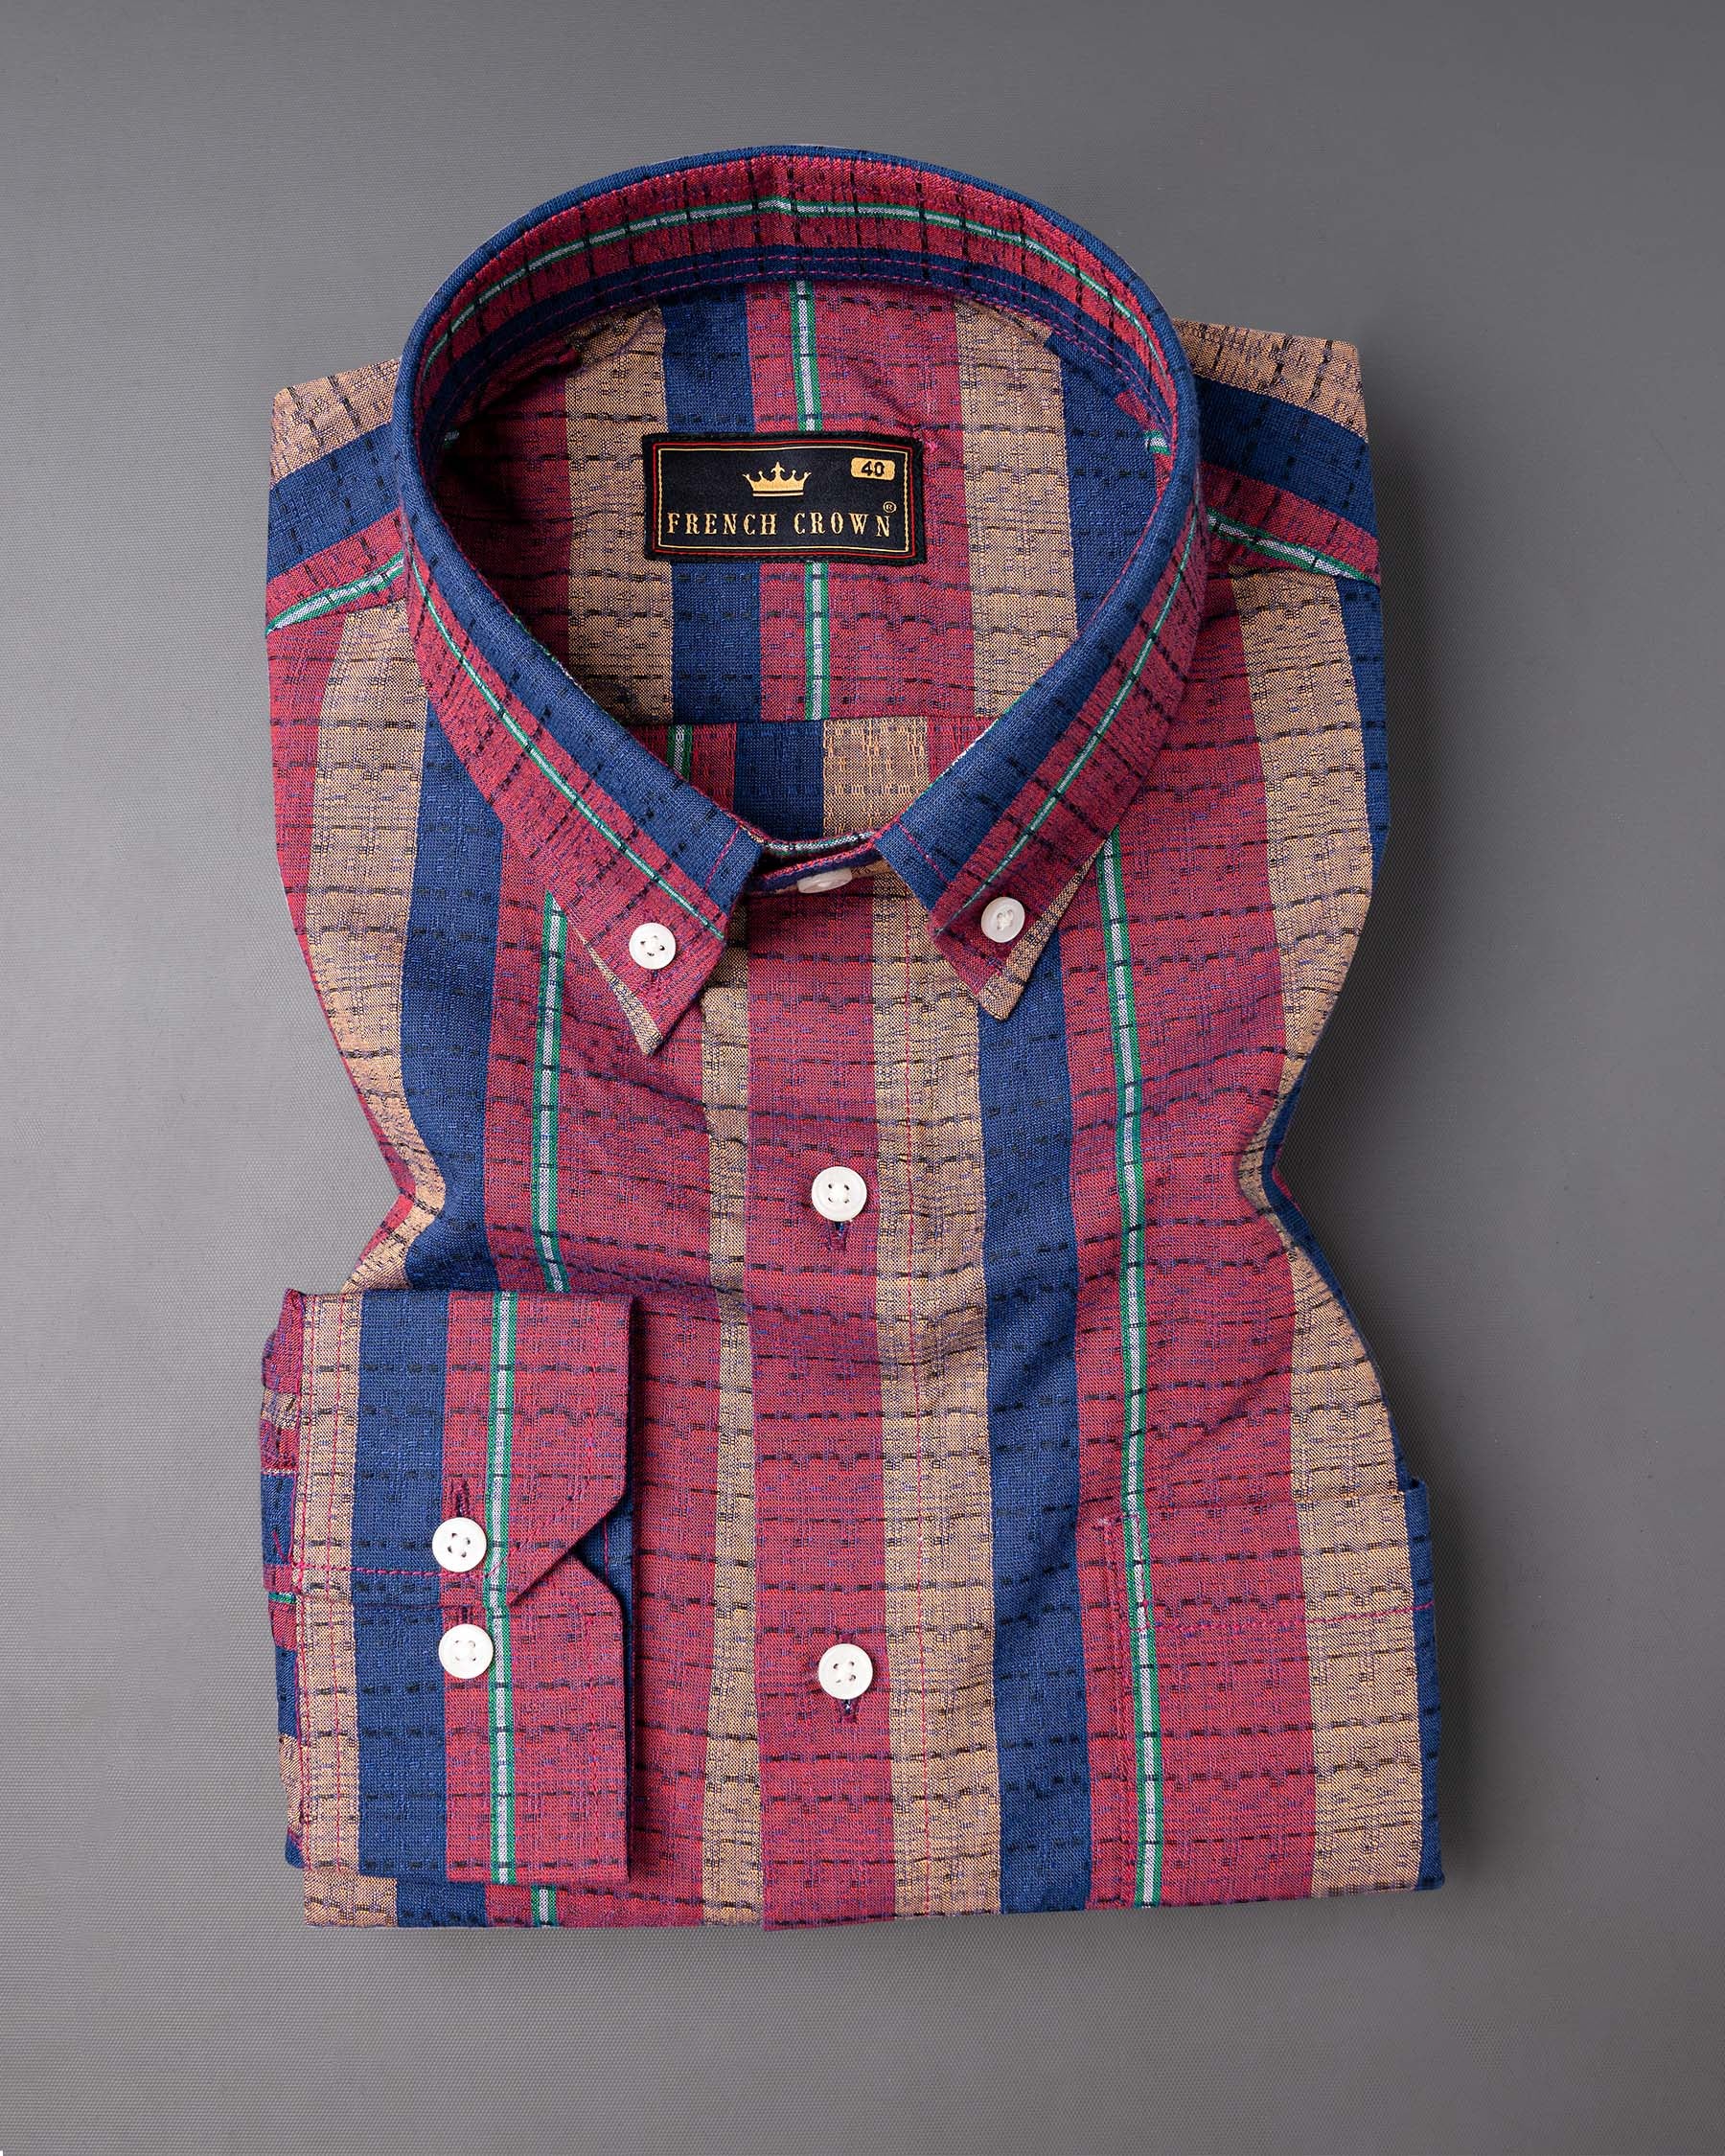 Hibiscus Red and Twilight Blue Striped Dobby Textured Premium Cotton Shirt 6989-BD-38, 6989-BD-H-38, 6989-BD-39, 6989-BD-H-39, 6989-BD-40, 6989-BD-H-40, 6989-BD-42, 6989-BD-H-42, 6989-BD-44, 6989-BD-H-44, 6989-BD-46, 6989-BD-H-46, 6989-BD-48, 6989-BD-H-48, 6989-BD-50, 6989-BD-H-50, 6989-BD-52, 6989-BD-H-52